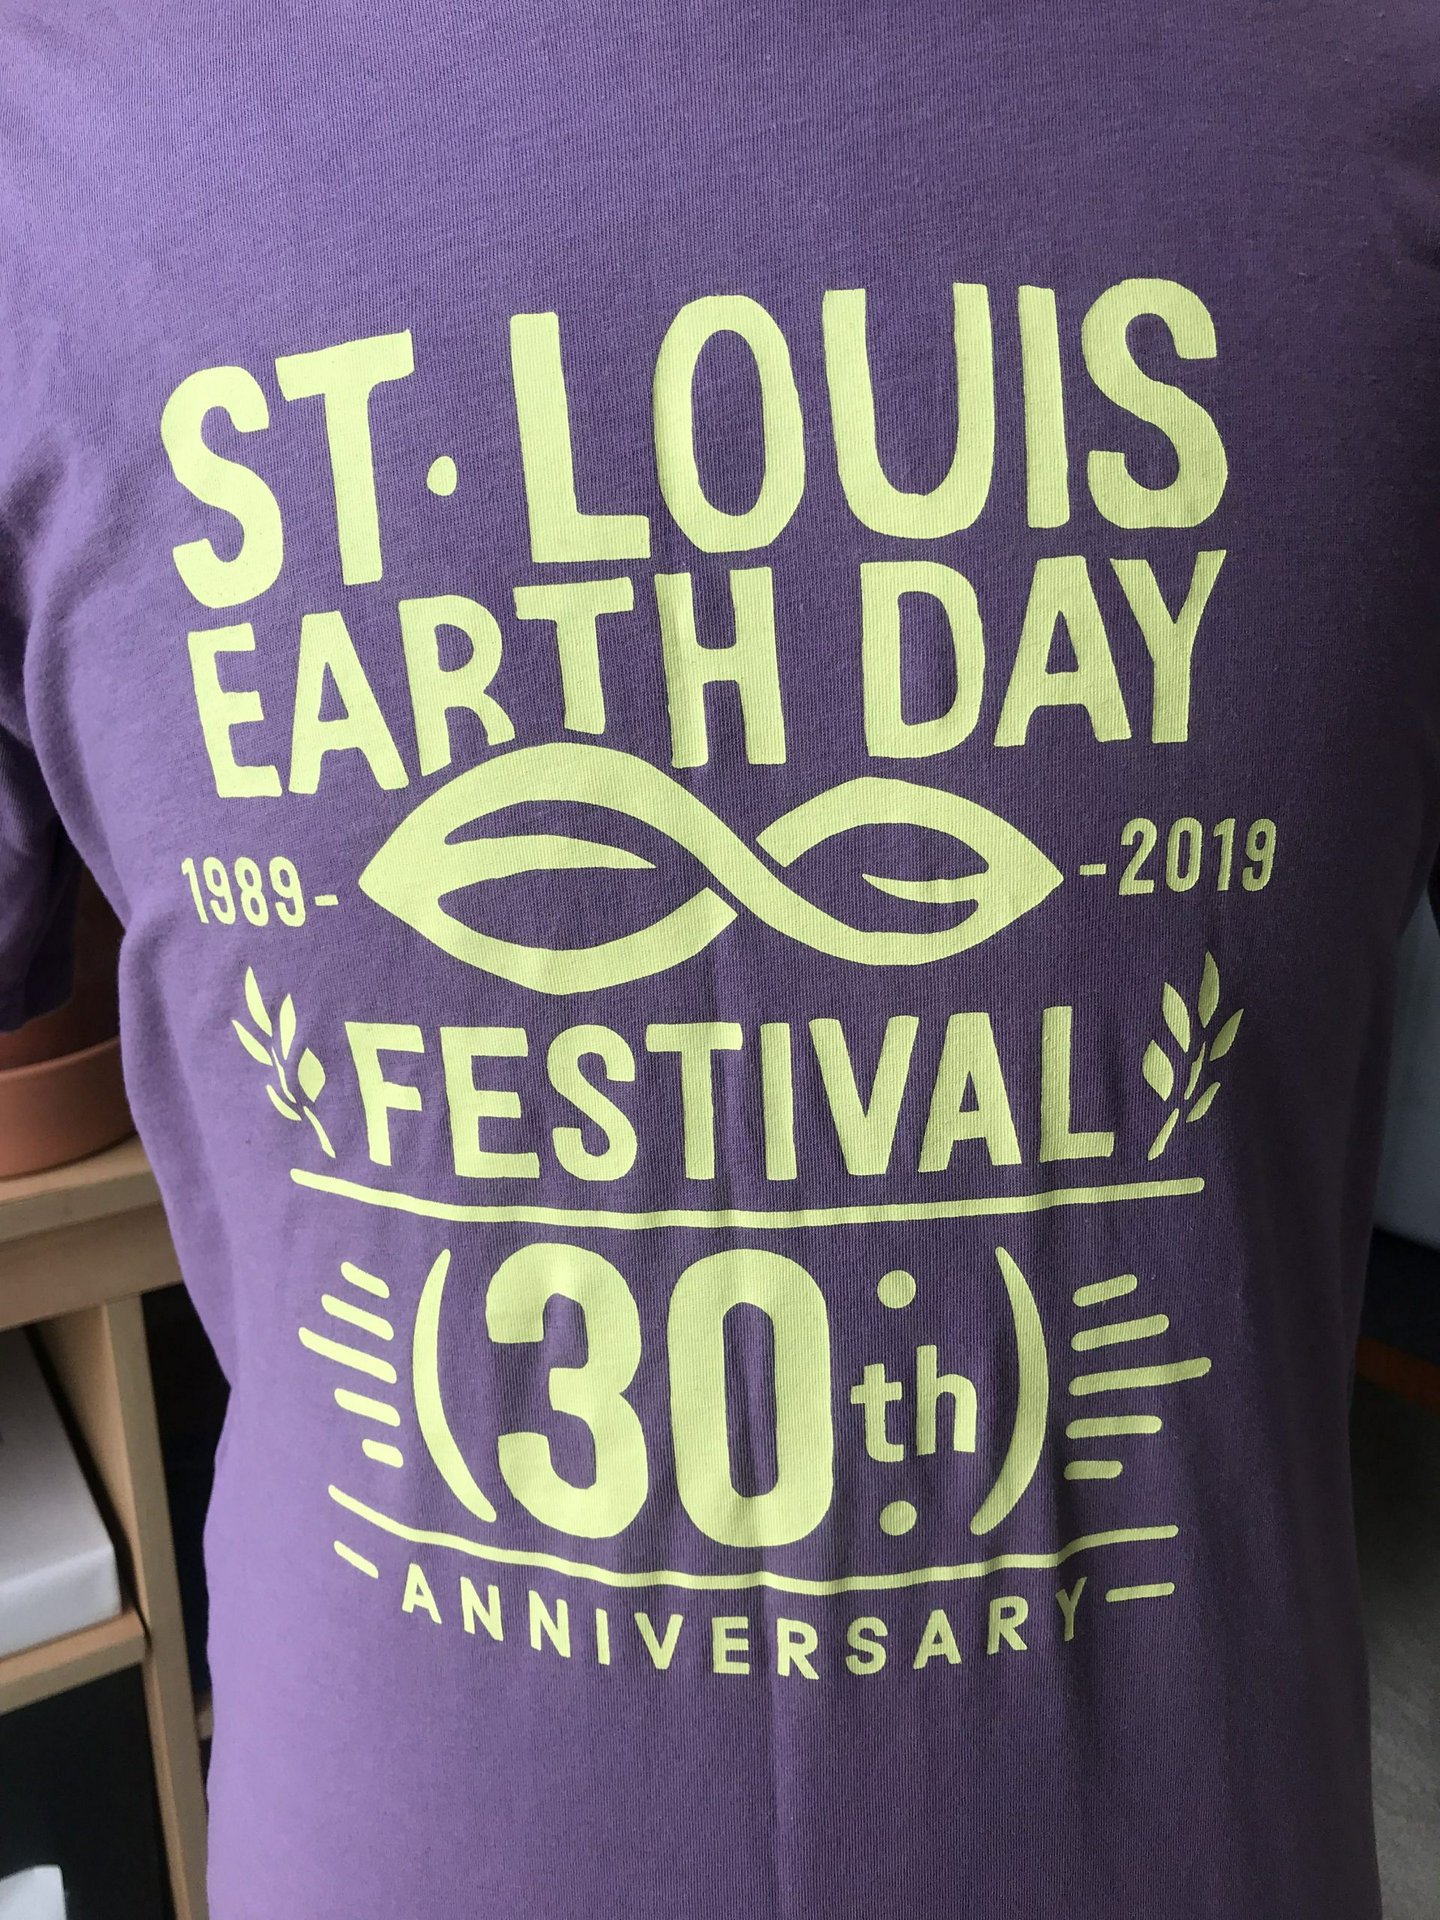 2017 St. Louis Earth Day Volunteer T-shirt